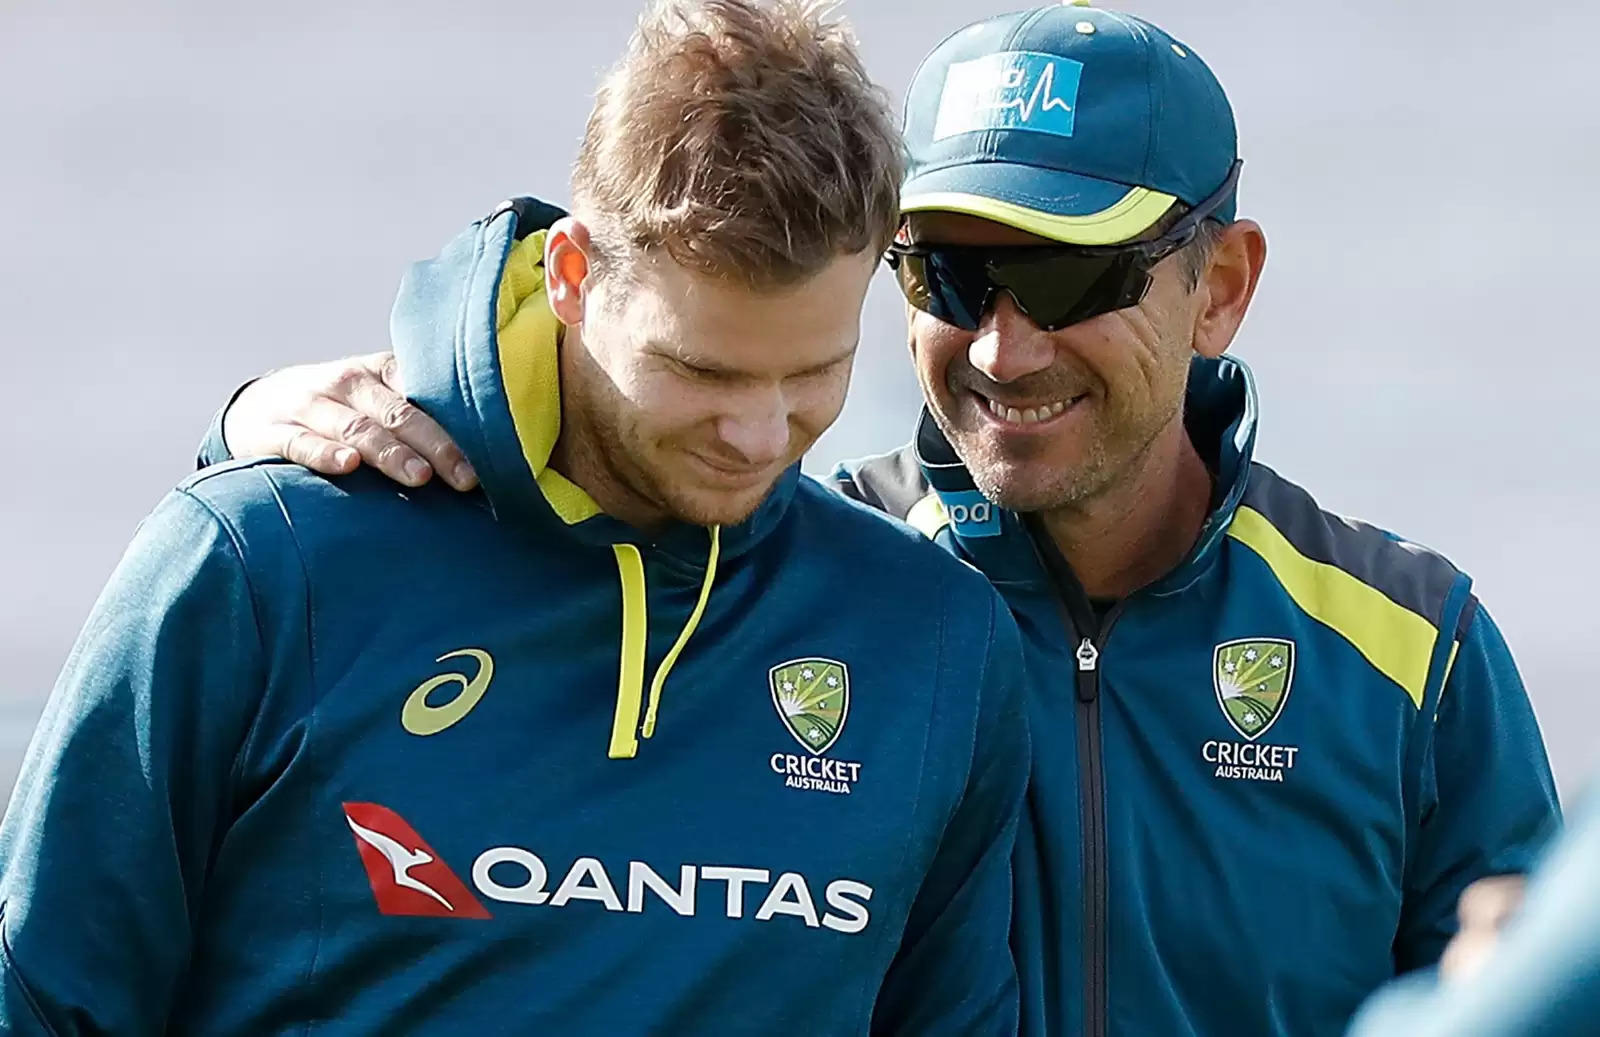 Steven Smith has to go through a process before he can regain captaincy, says Justin Langer